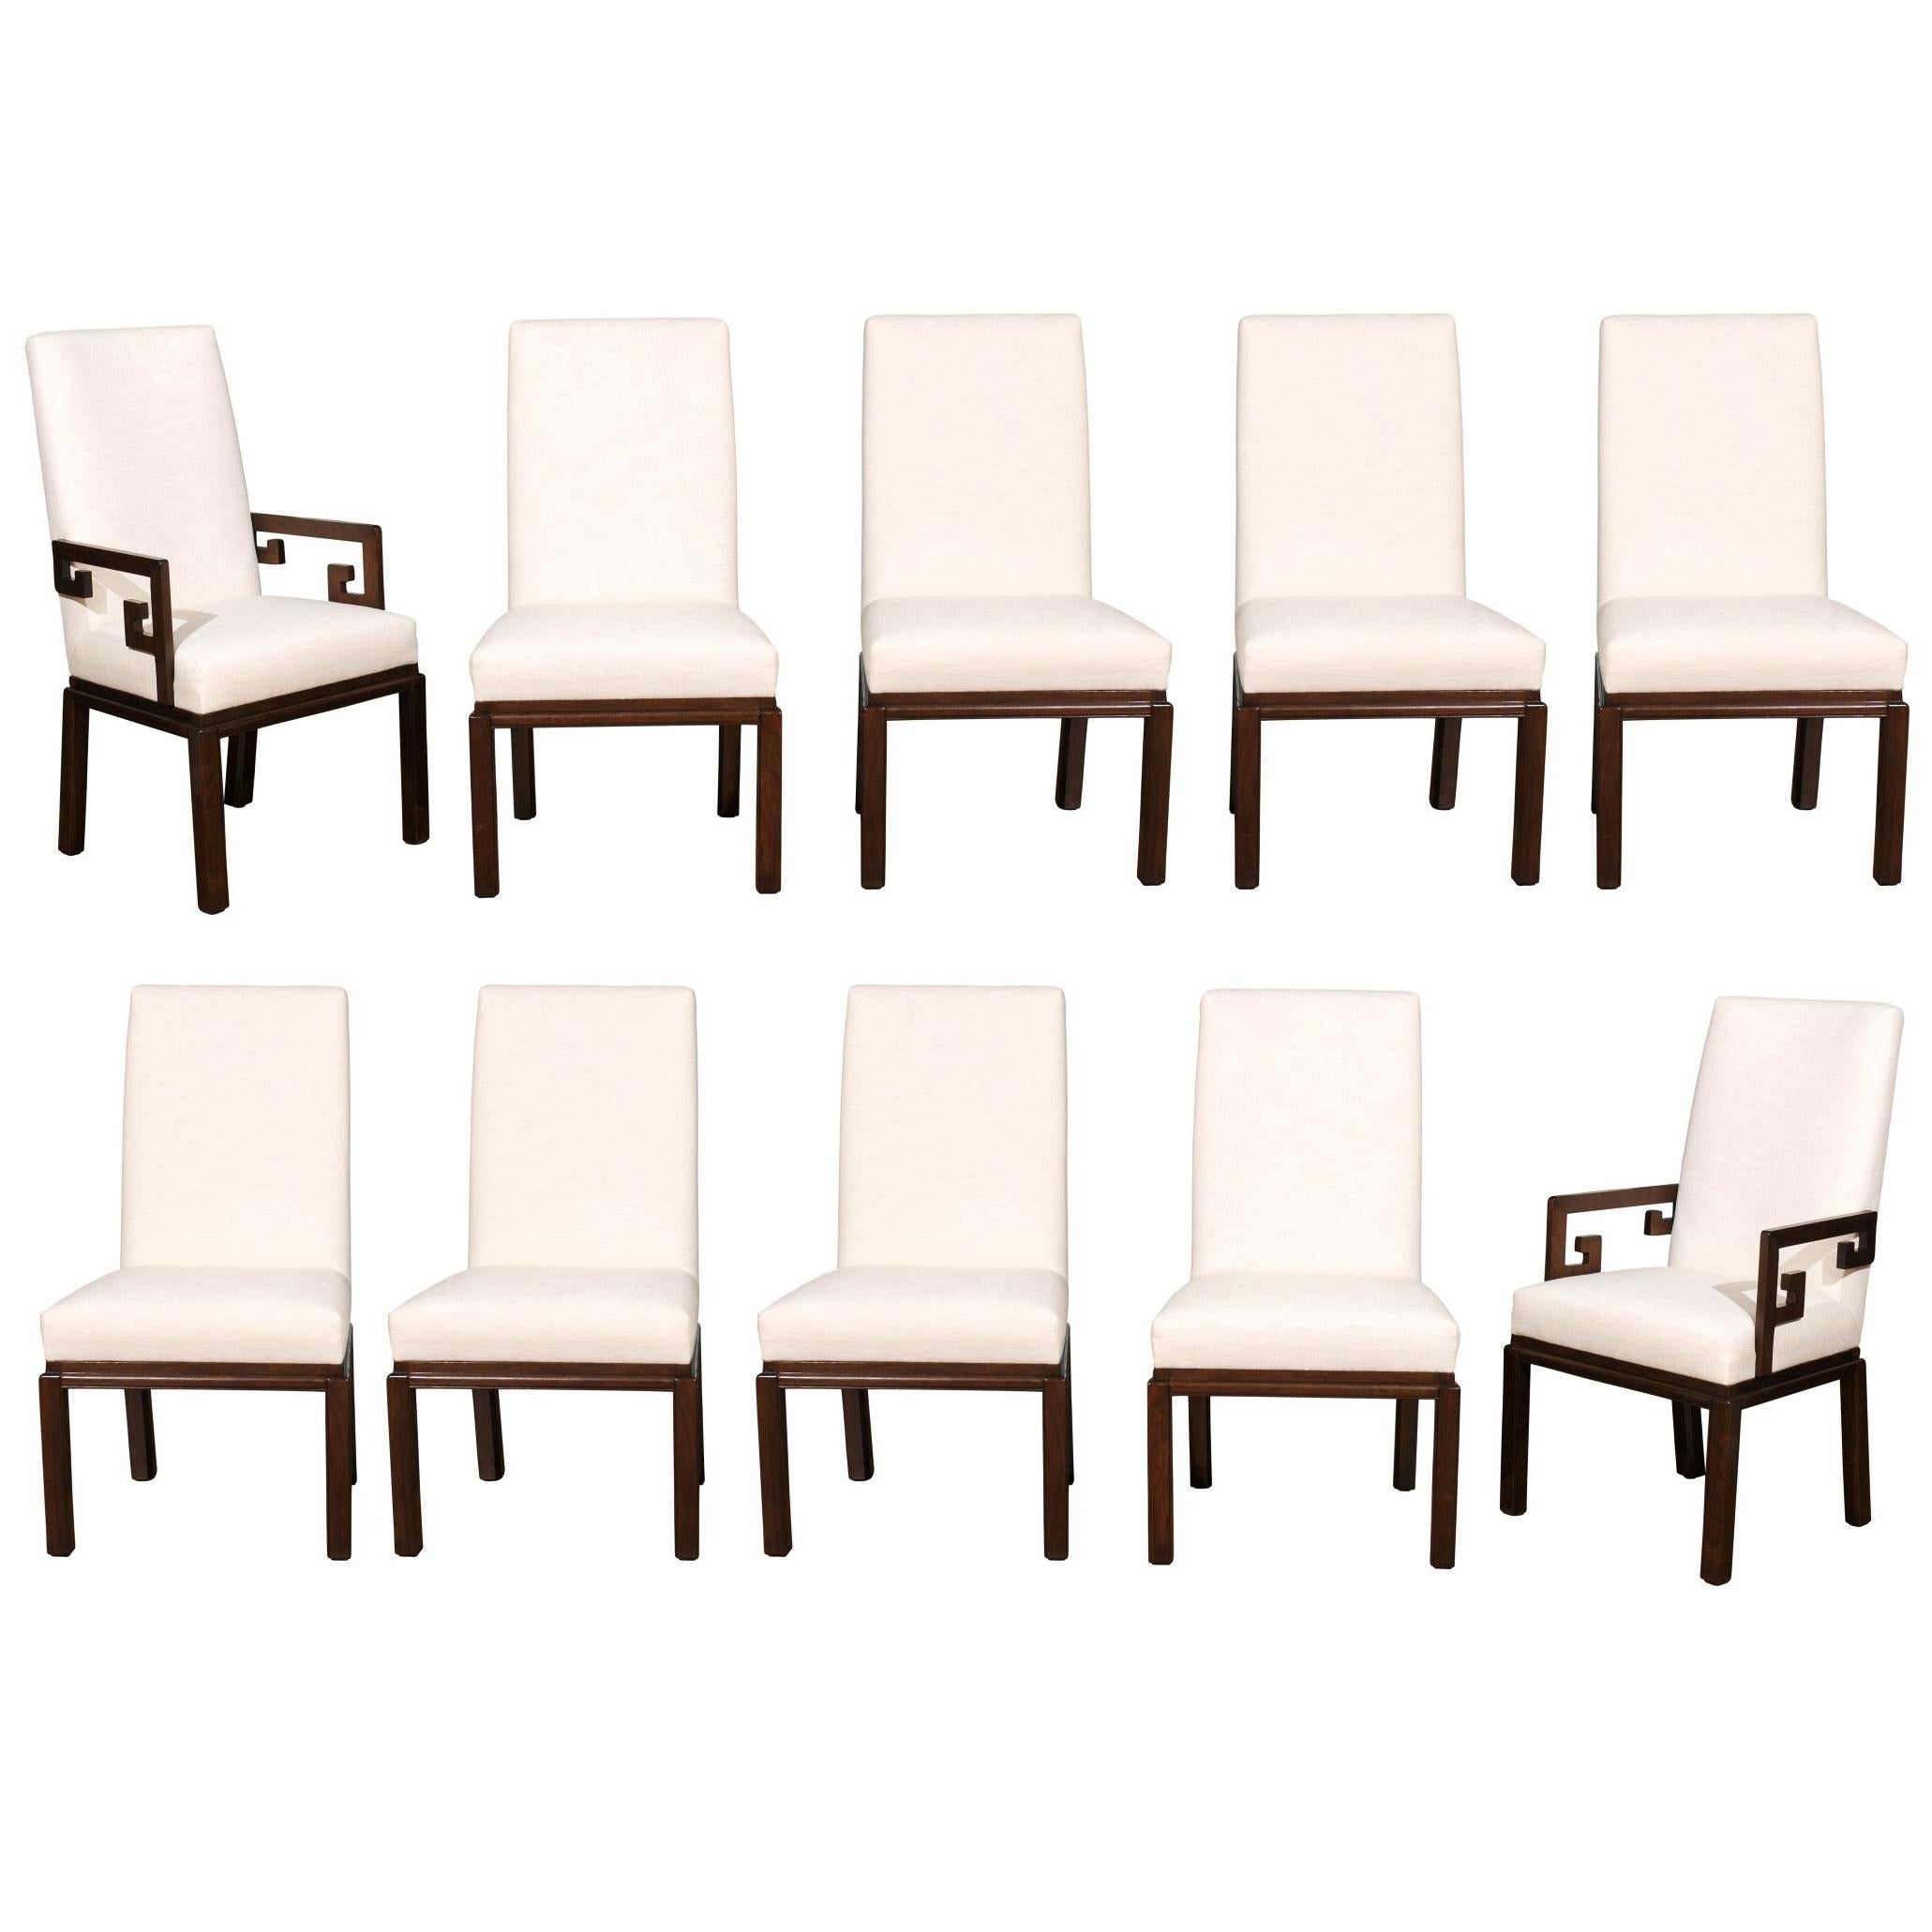 Elegant Restored Set of 10 Parsons Style Dining Chairs by Baker, Circa 1970